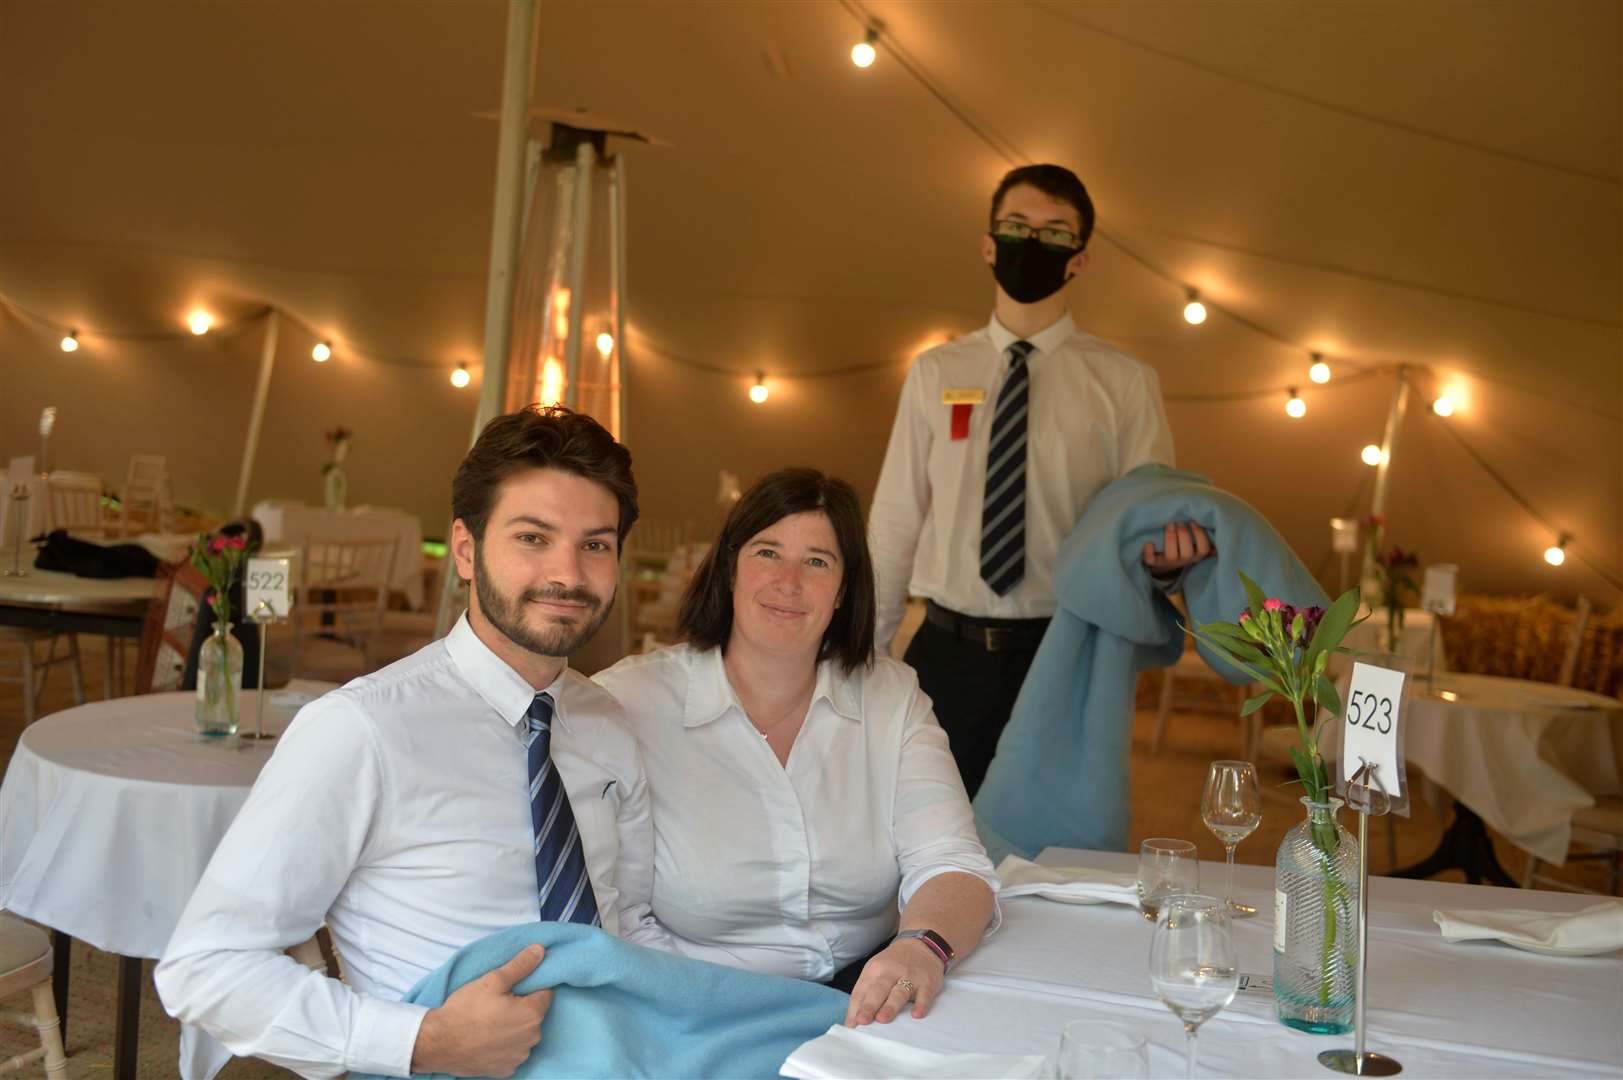 Pierre-valentin Cortes, Kelly Taylor and Aaron Maclean at Kingsmills Hotel's Garden Restaurant & Bar, where they are encouraging people to BYOB (bring your own blanket).